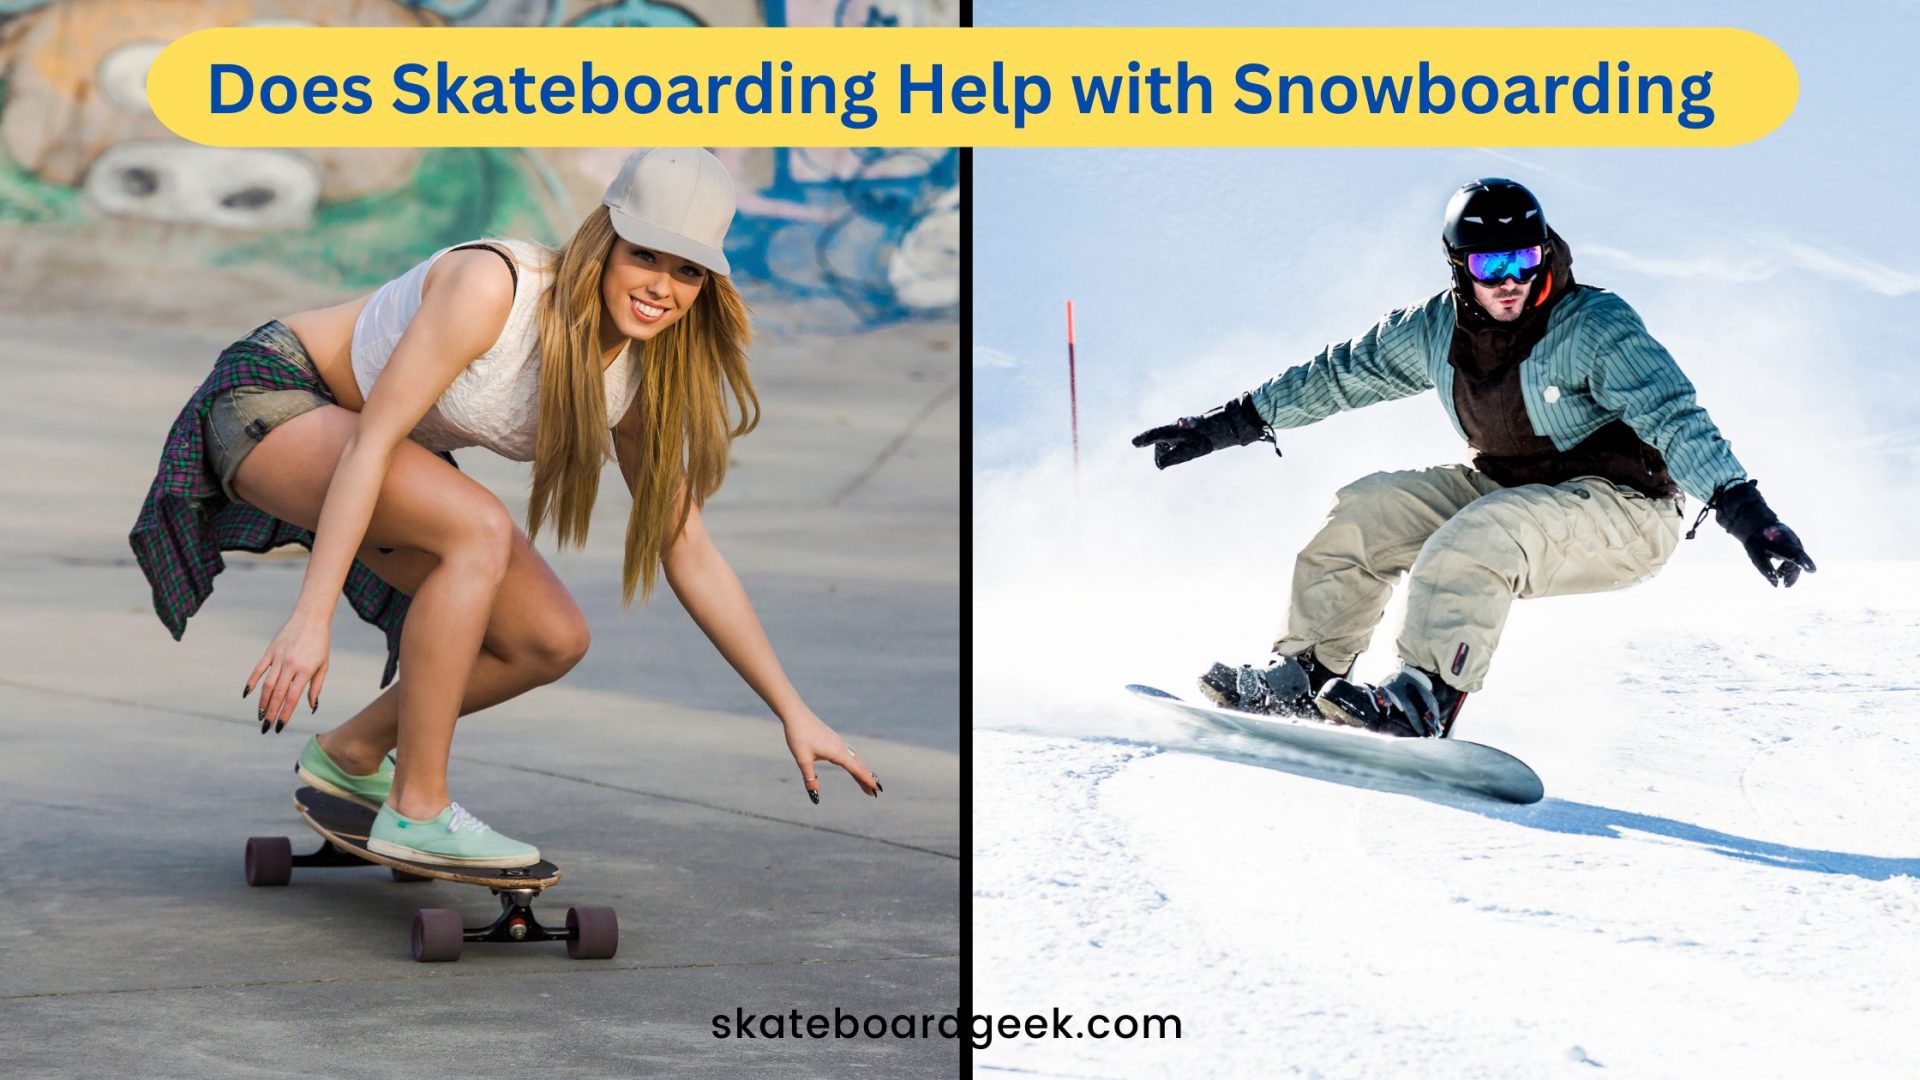 Does skateboarding help with snowboarding